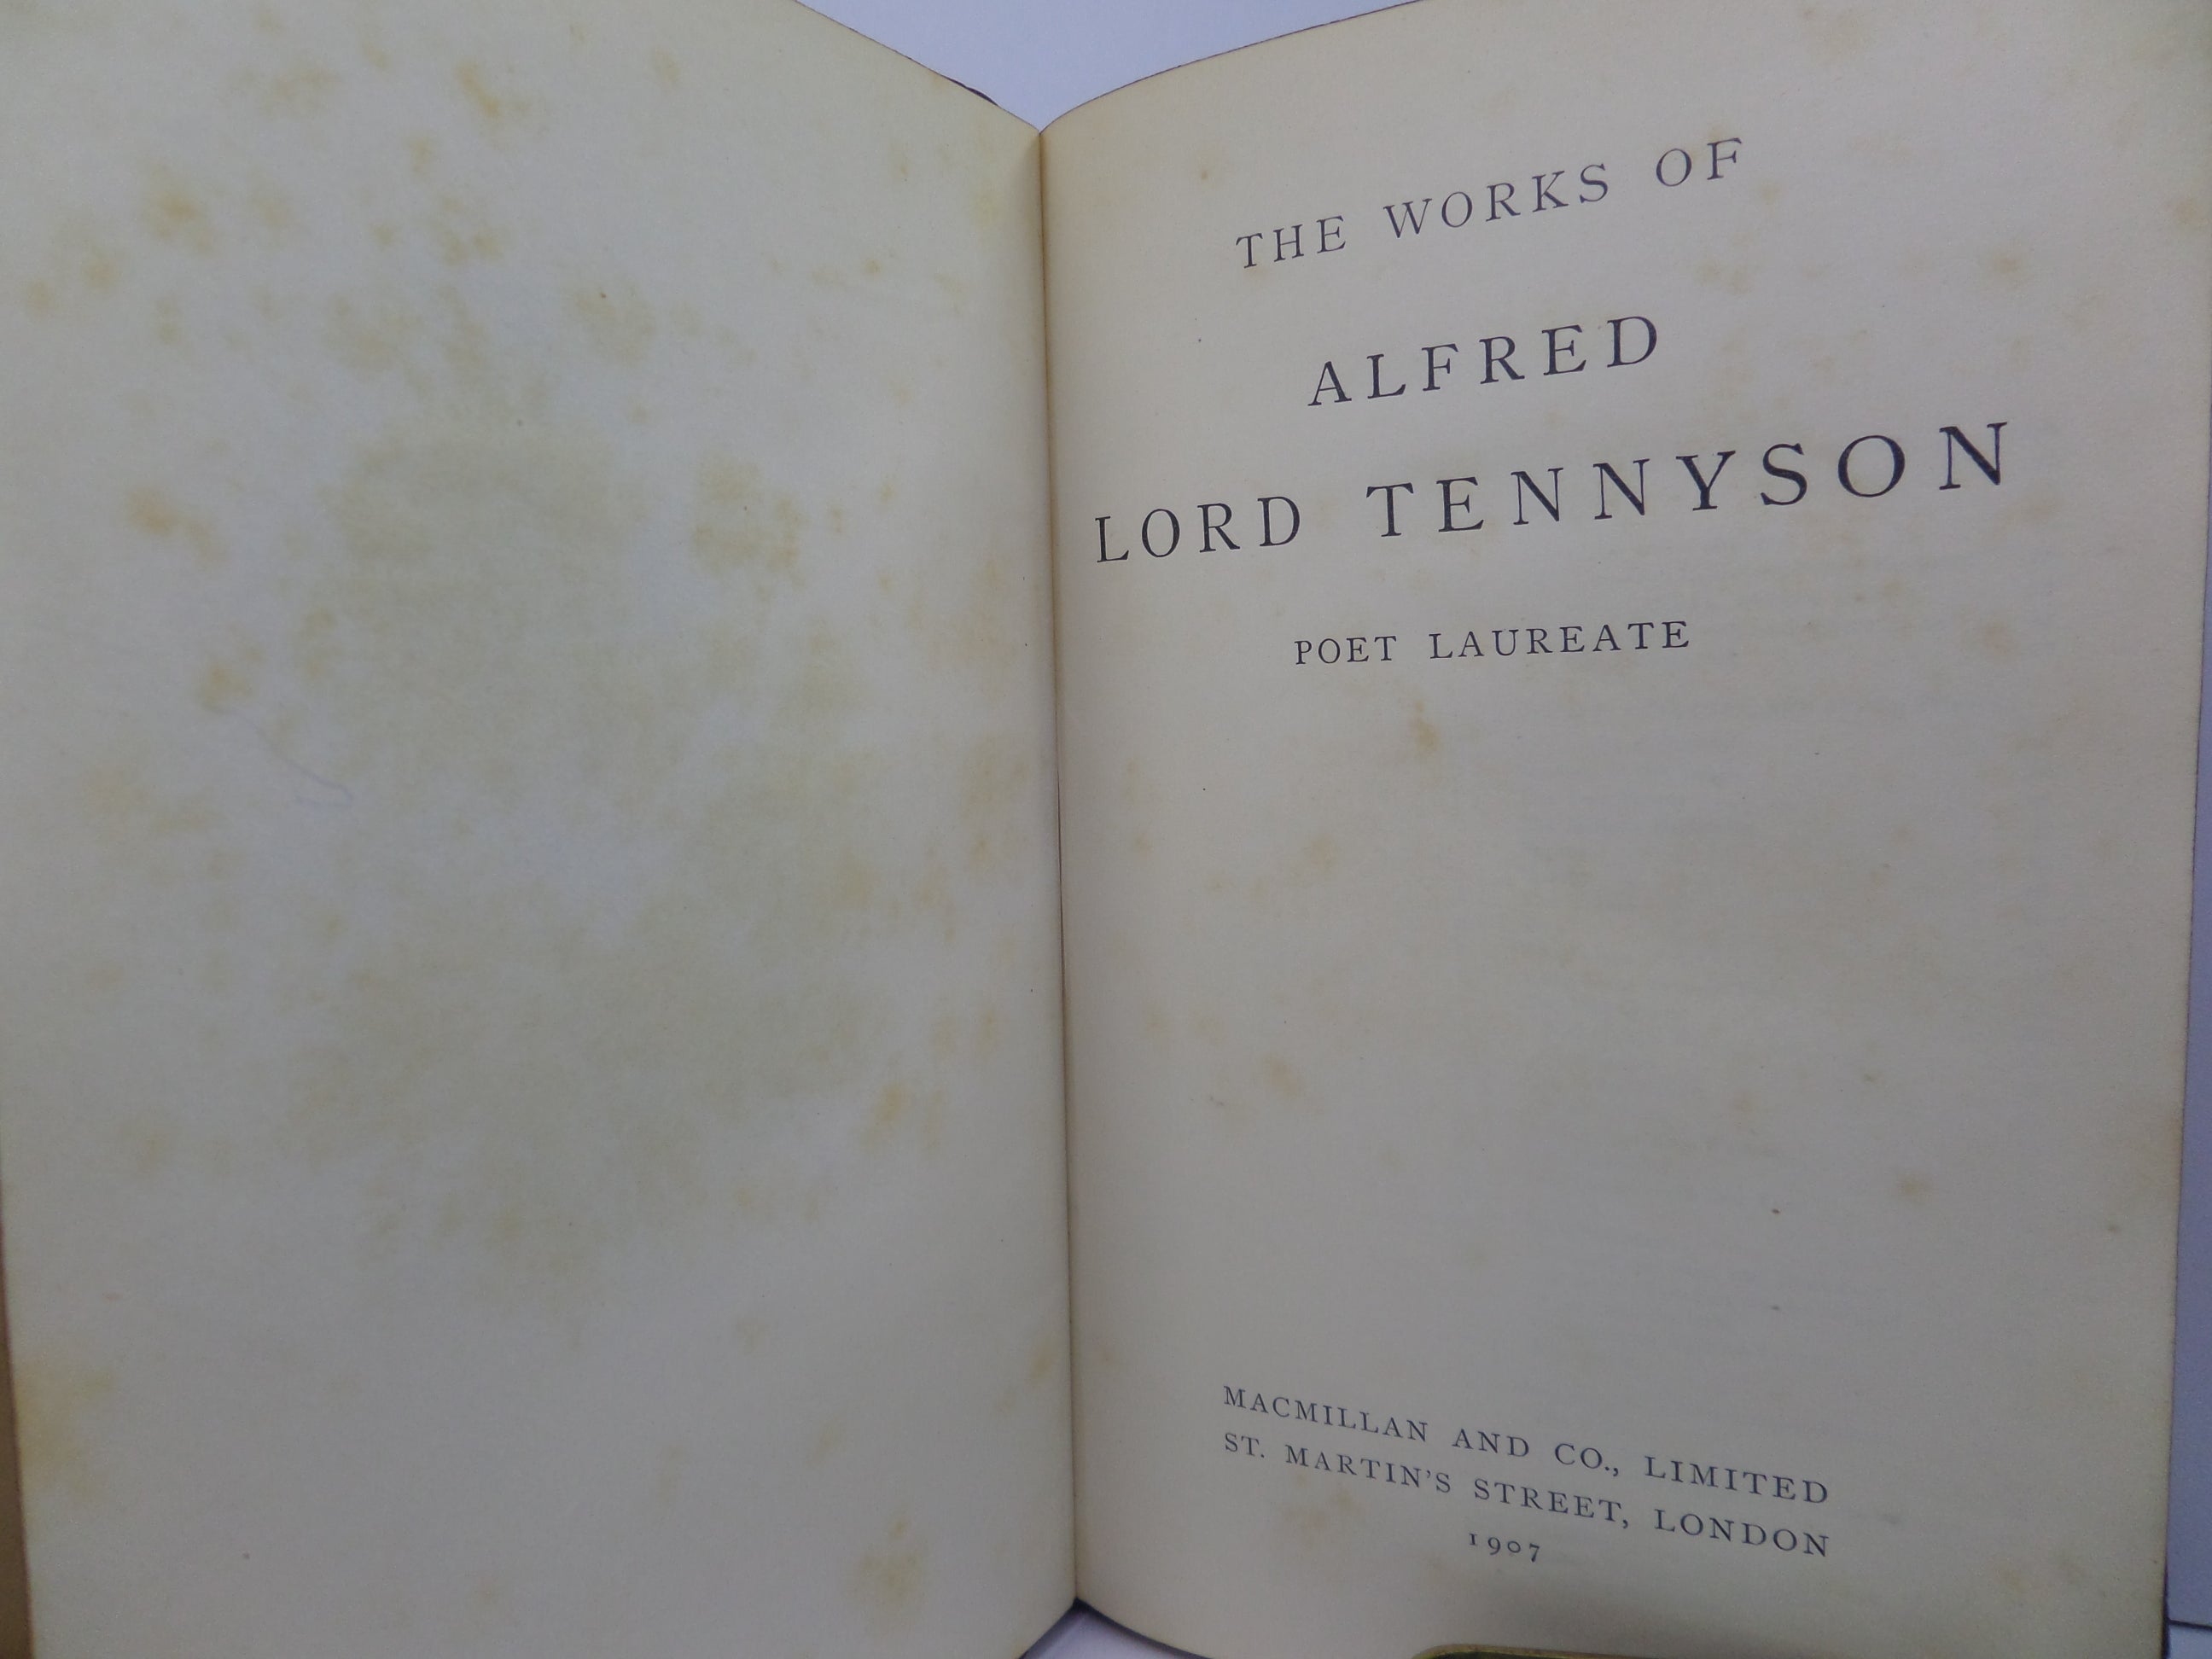 THE WORKS OF ALFRED LORD TENNYSON 1907 STUNNING ARTS AND CRAFTS BINDING